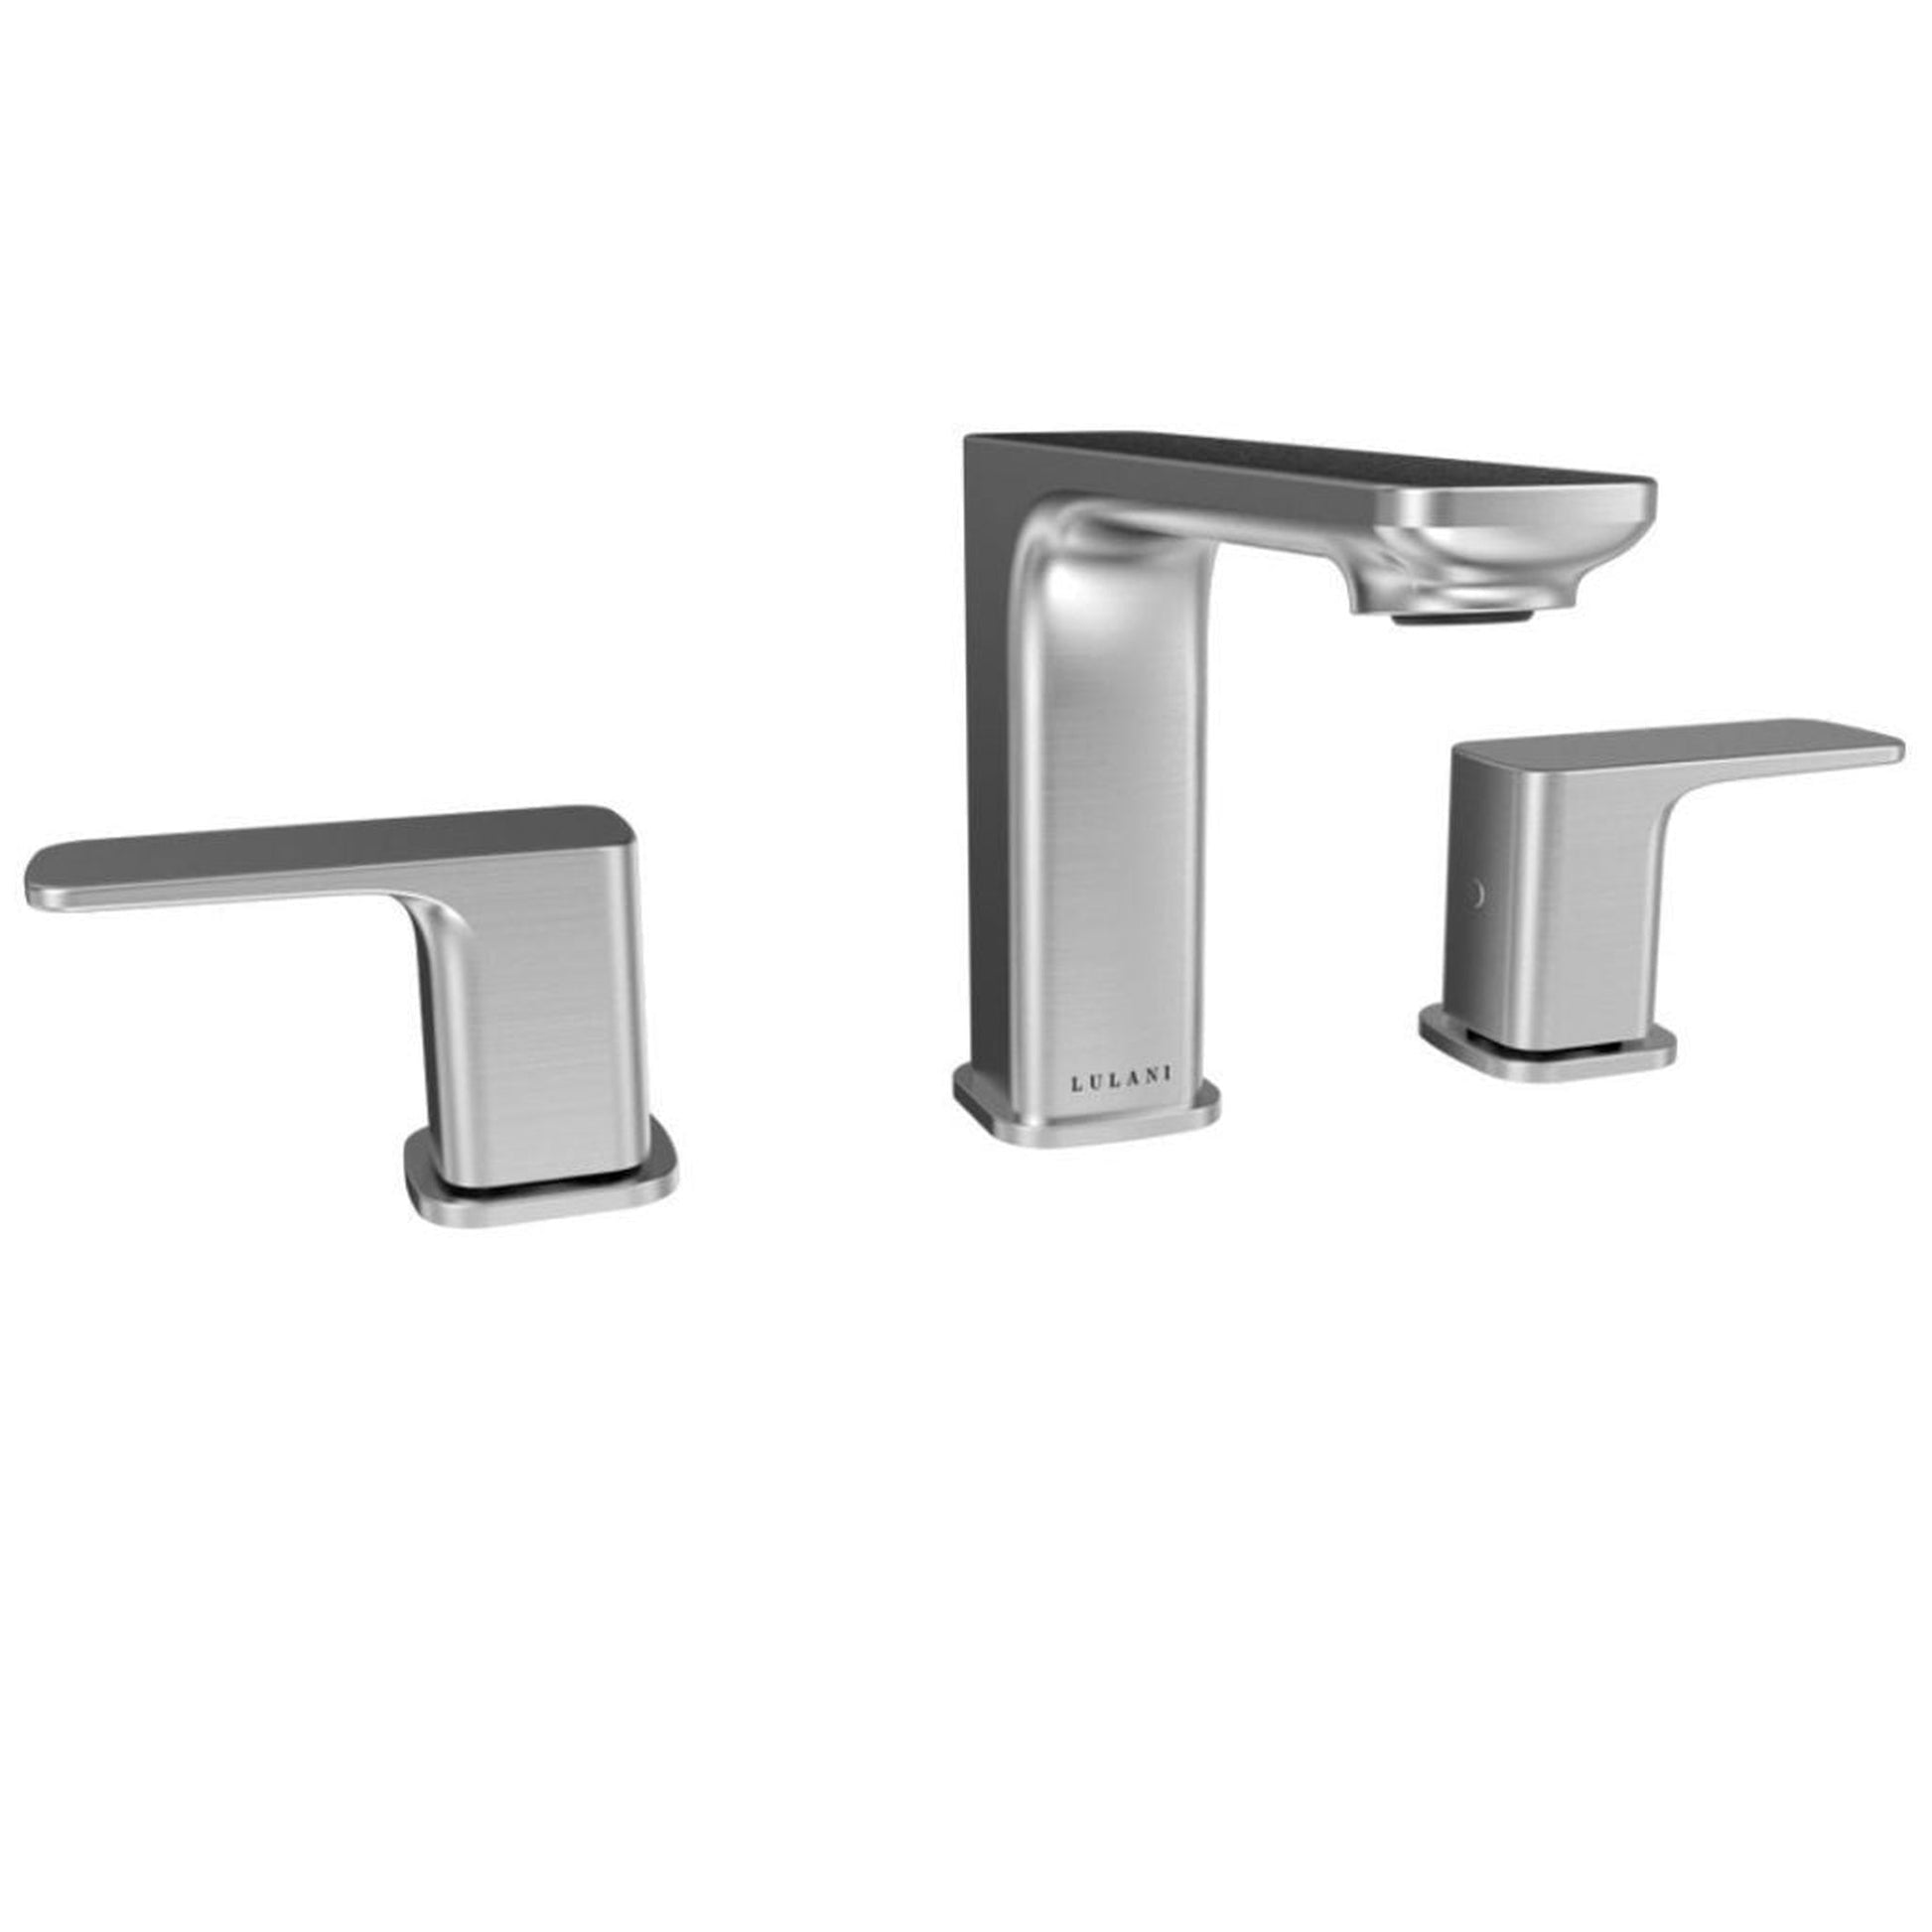 Lulani Corsica Brushed Nickel 1.2 GPM Two Handle Widespread Faucet With Drain Assembly